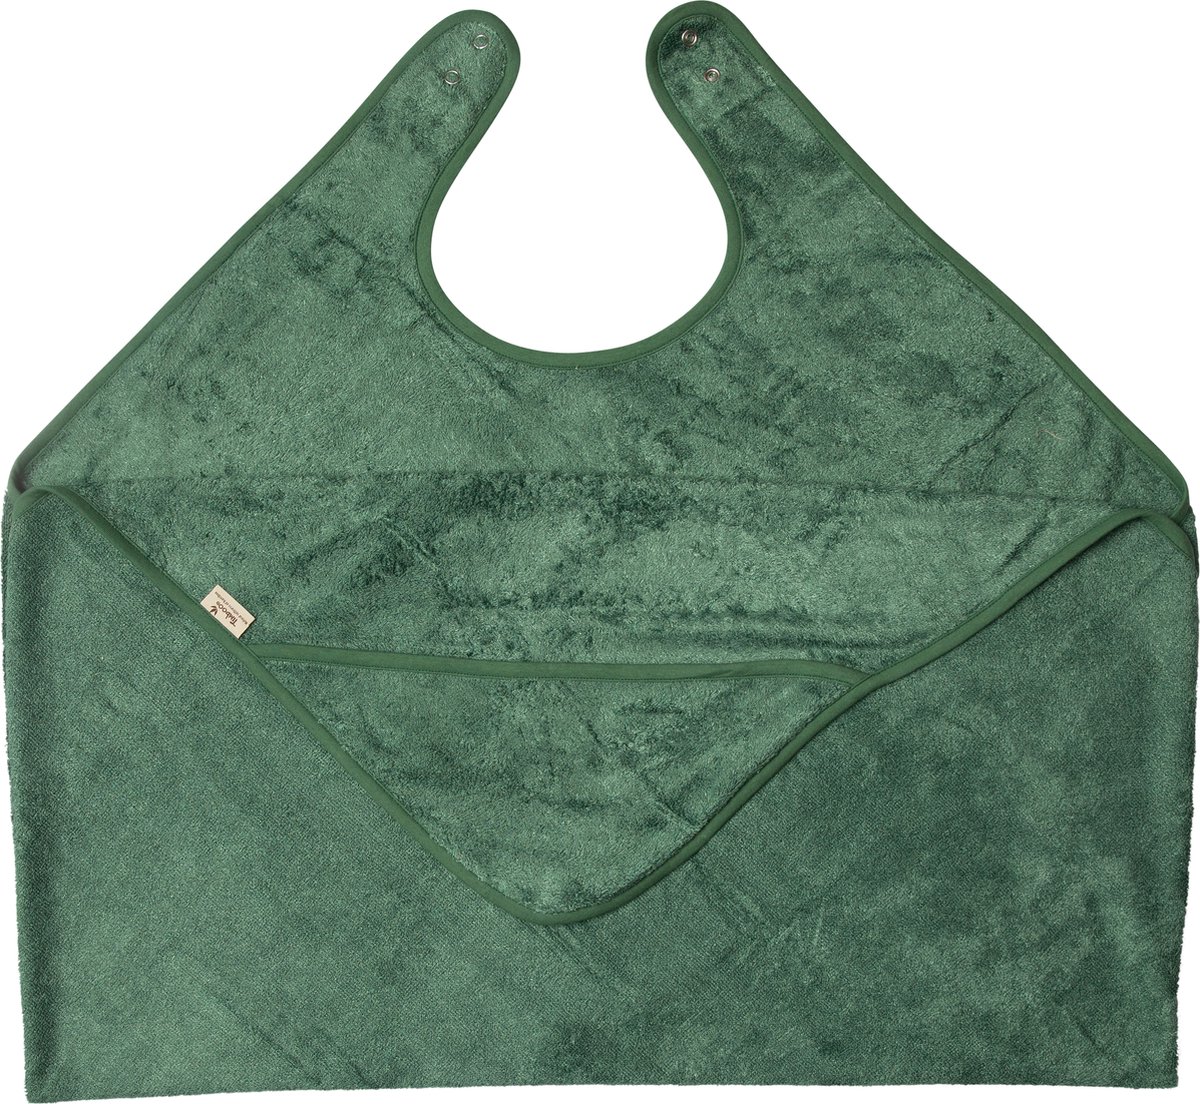 Timboo Cuddle towel adult/baby - Aspen green